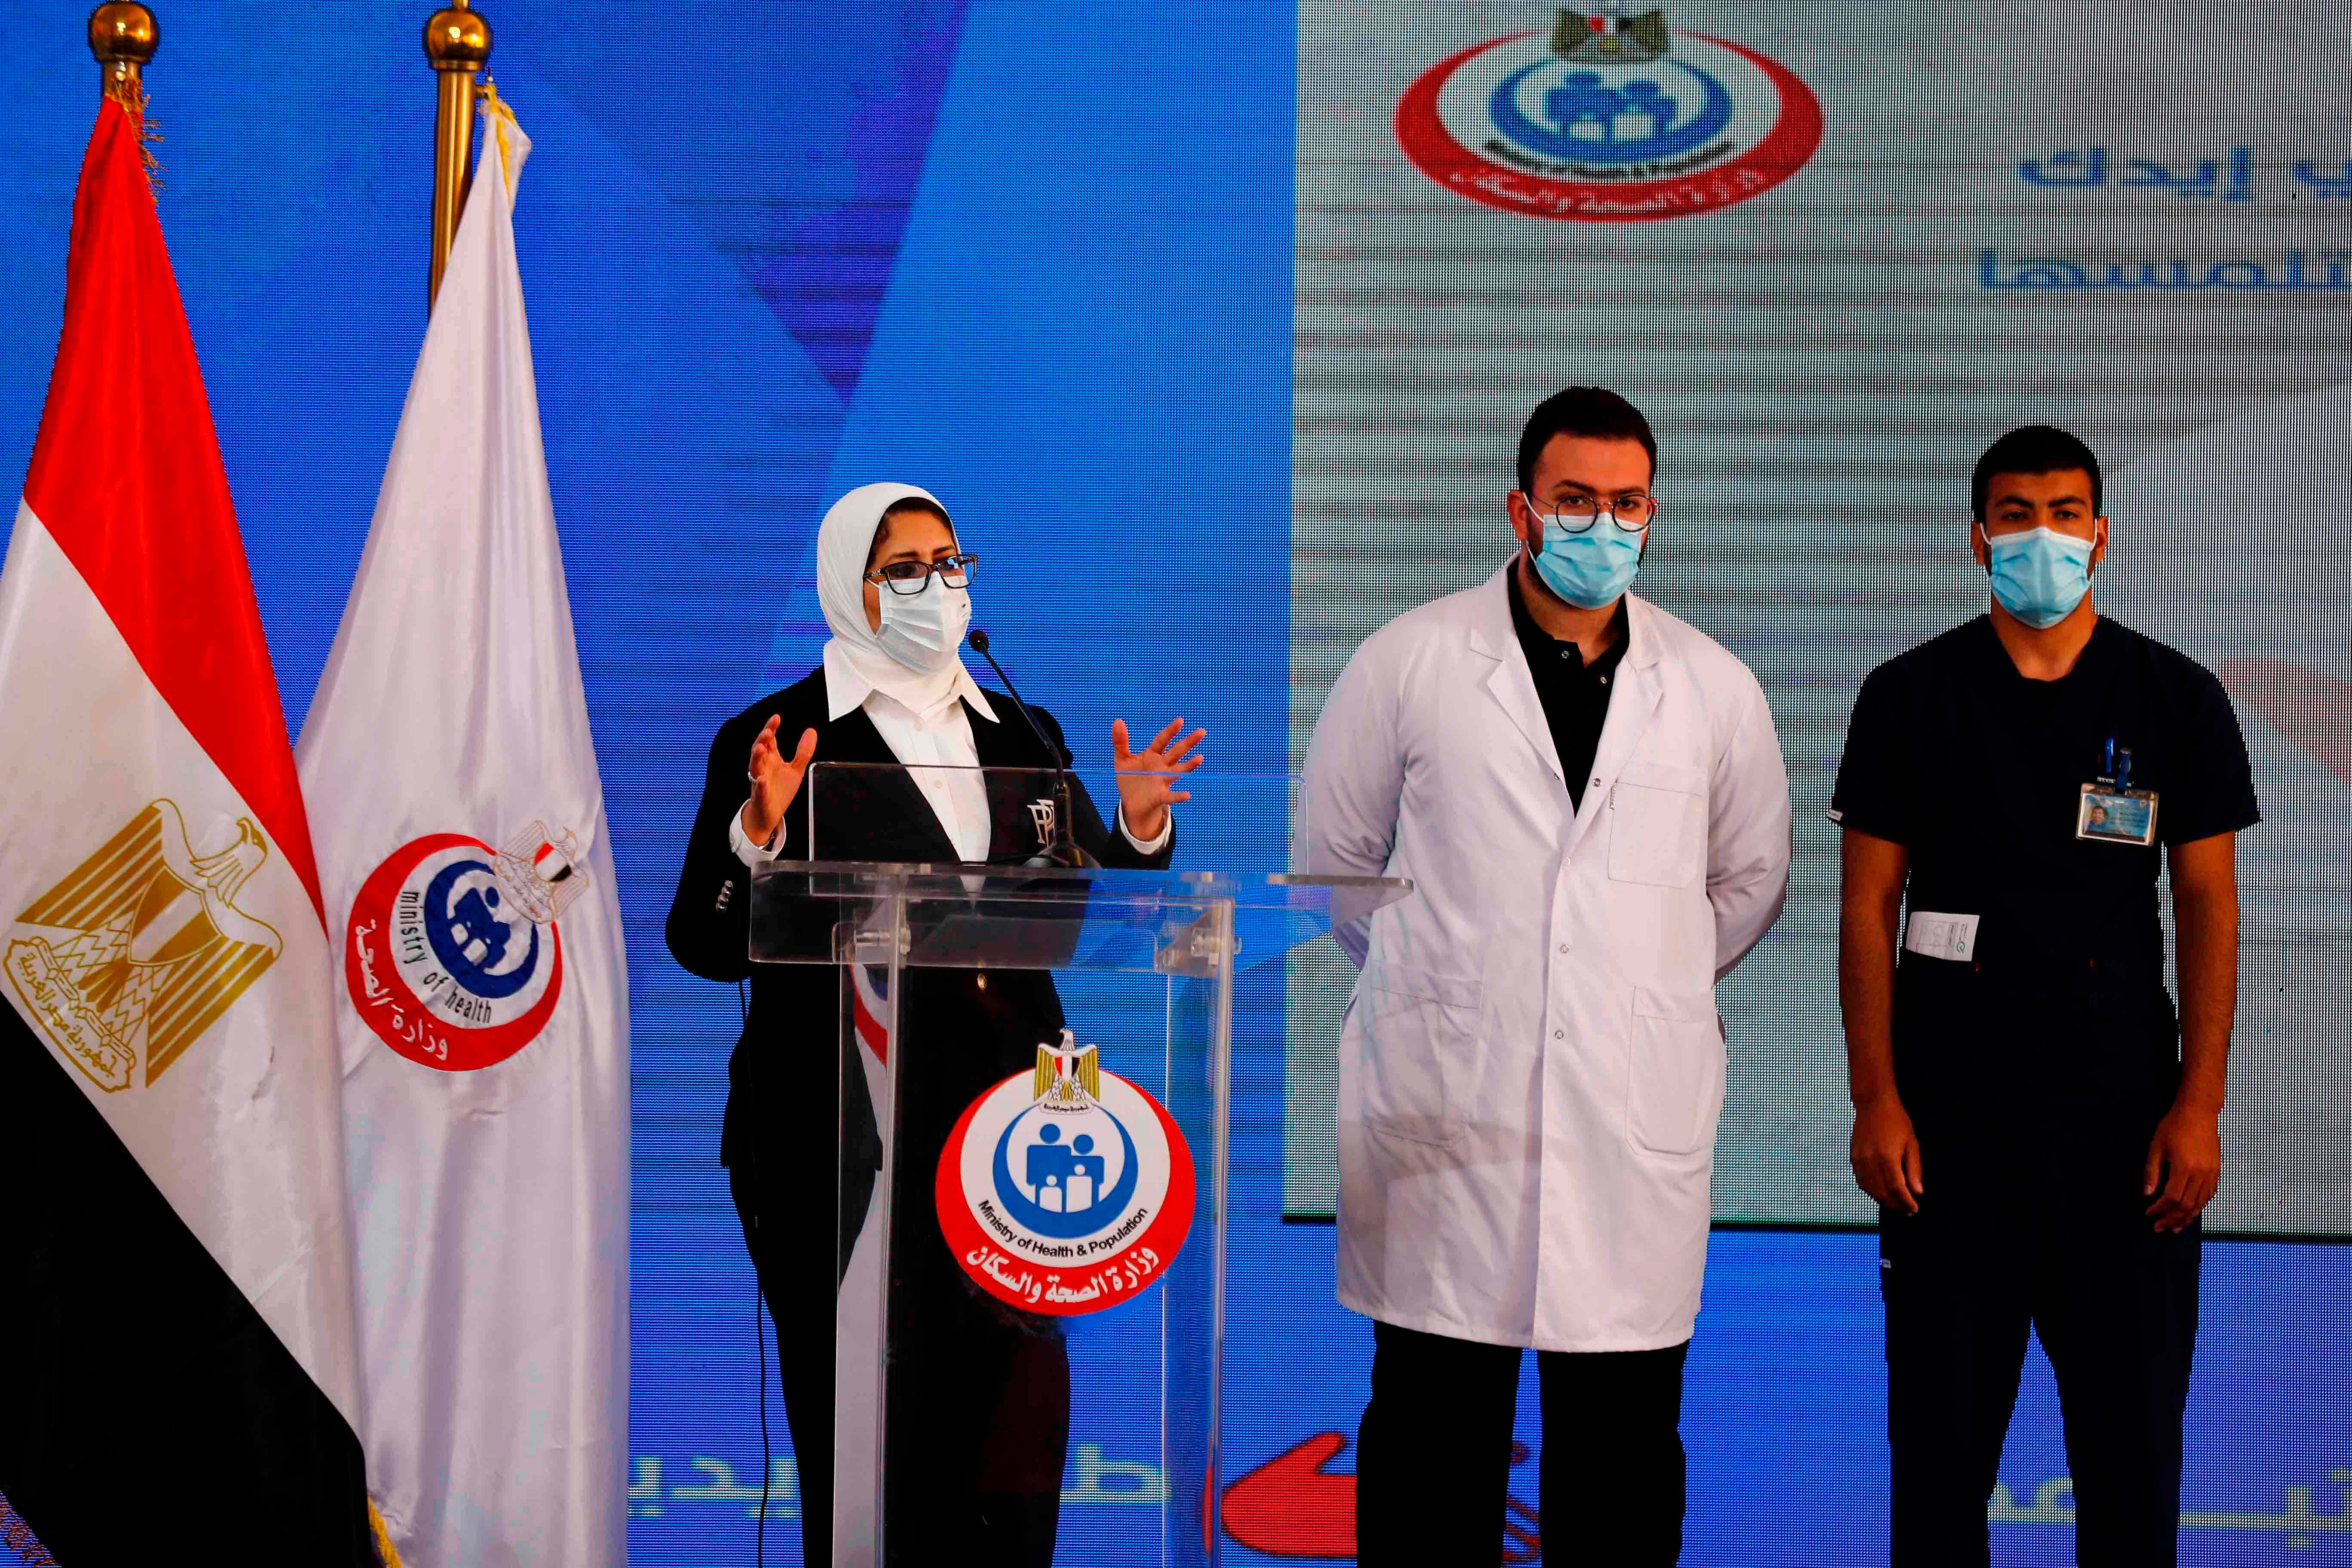 Egyptian Health Minister Hala Zayed gives a press conference, accompanied by doctor Abdelmouim Selem and medical staff member Ahmed Hemdan. Credit: AFP Photo